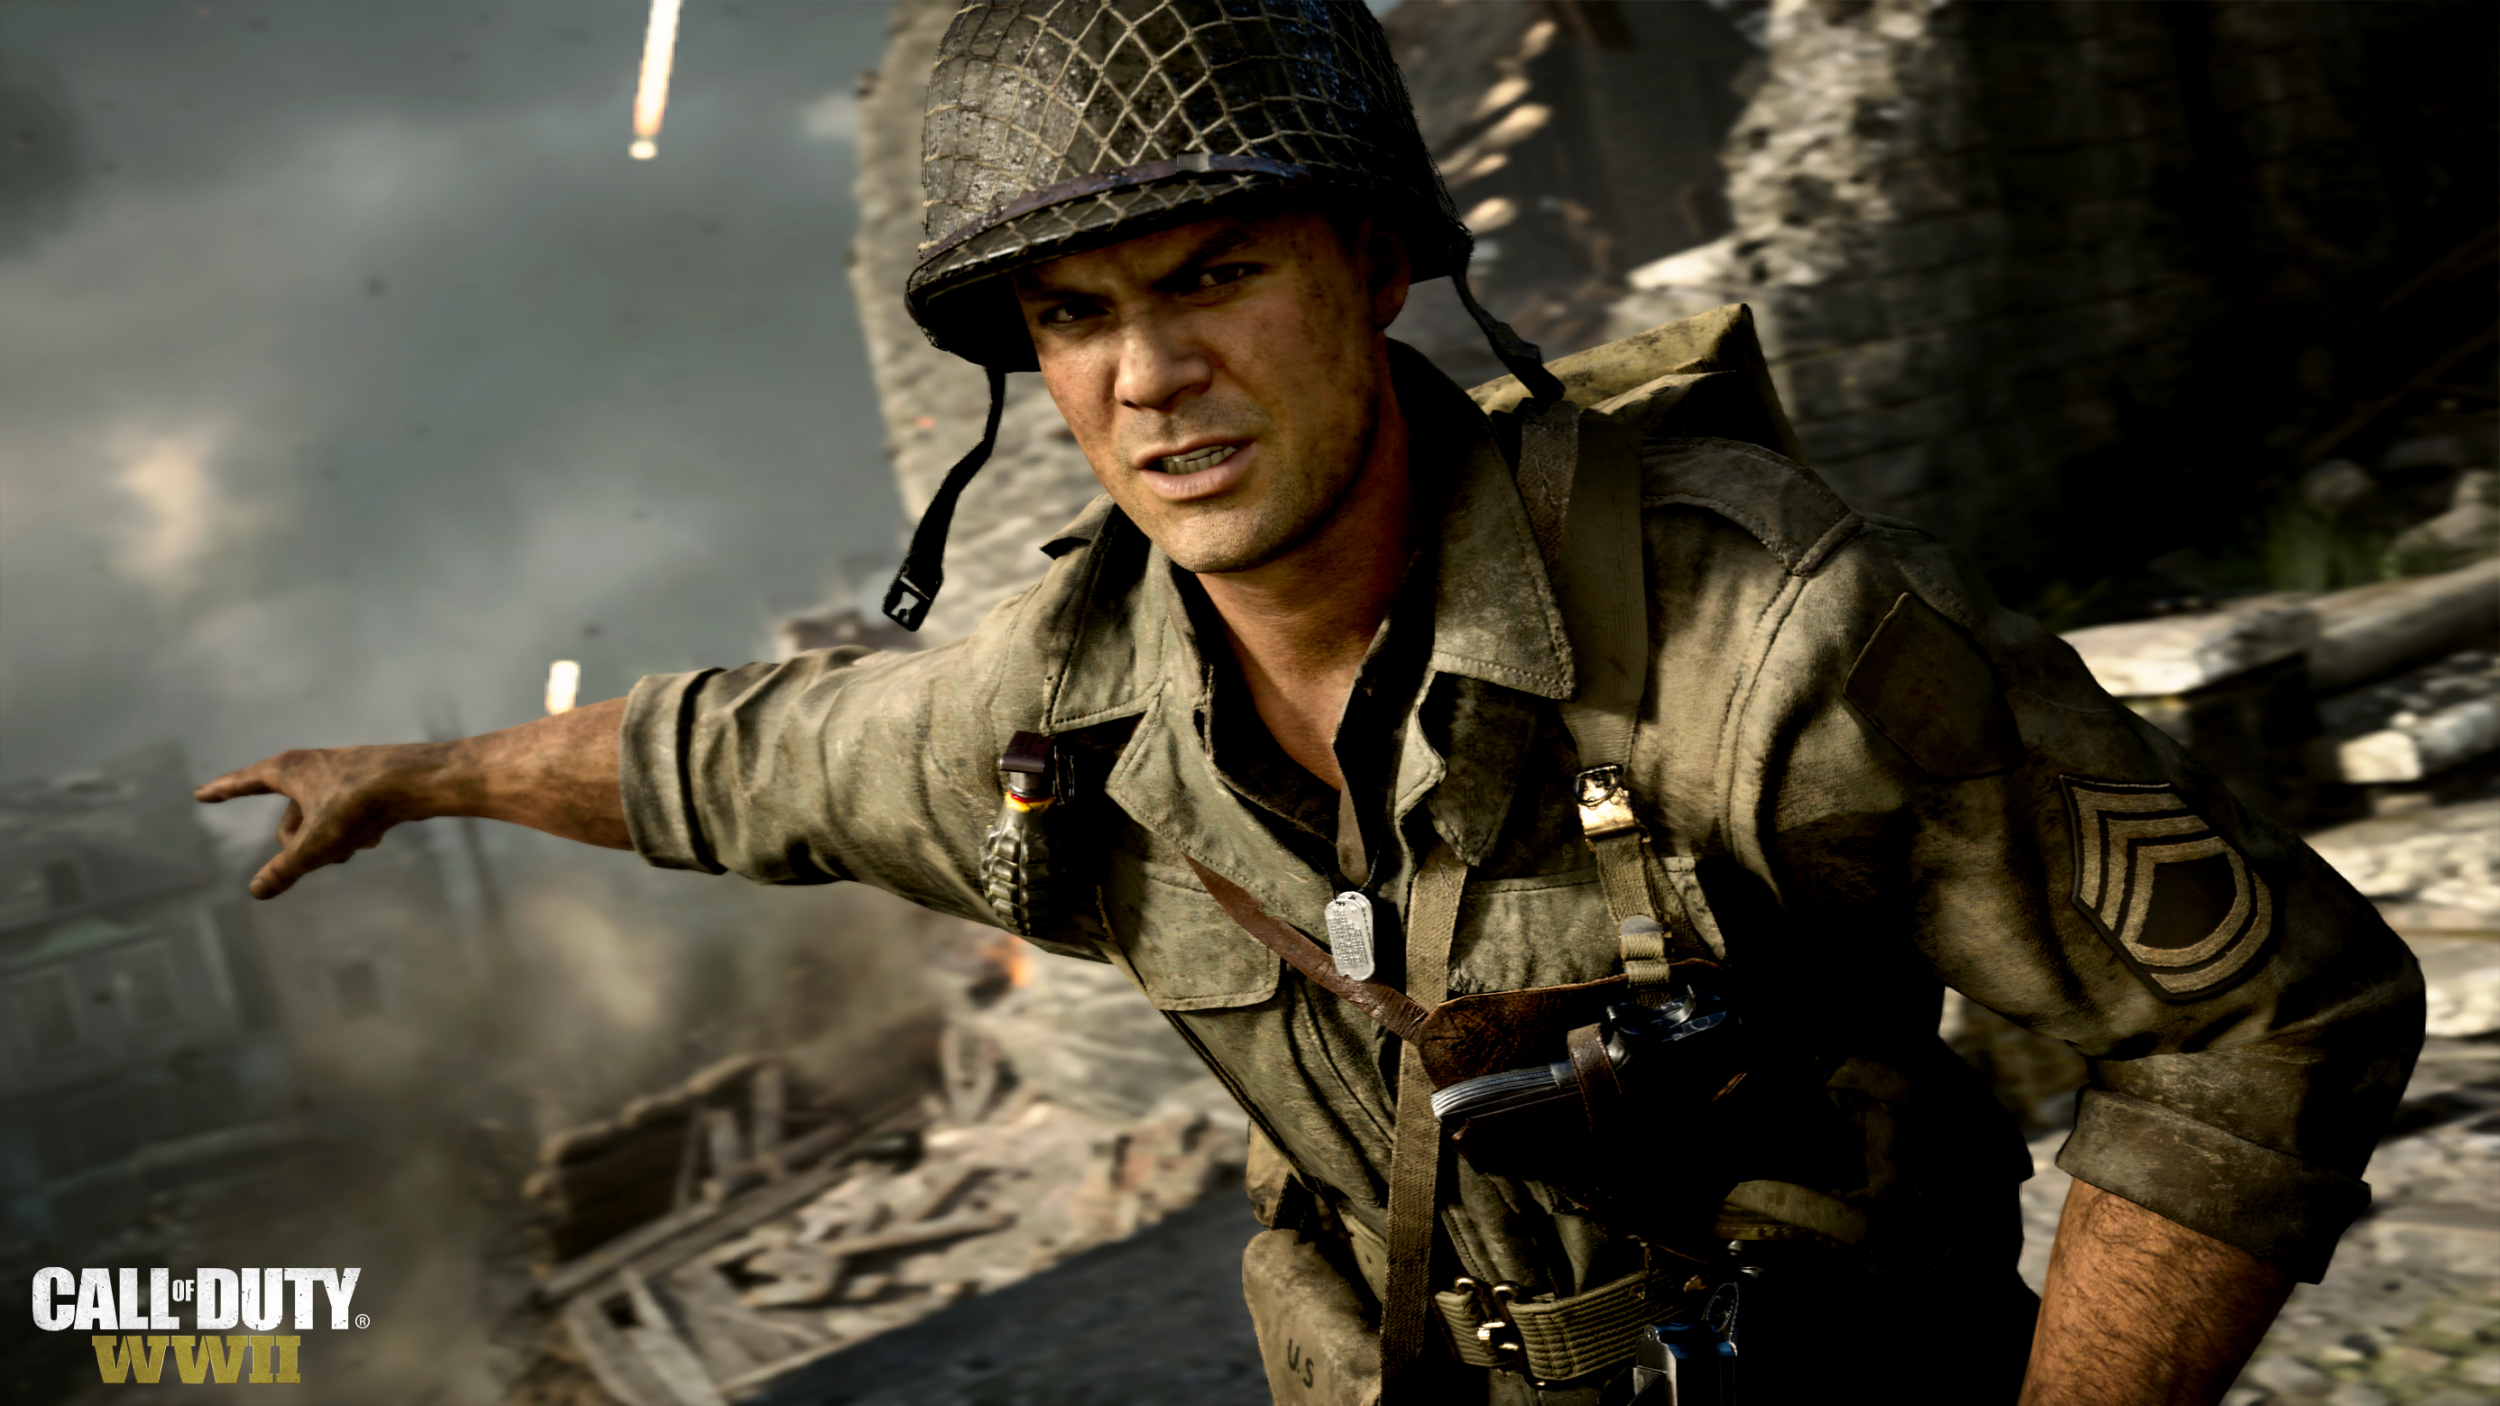 how do you get into call of duty world war 2 co-op campaign